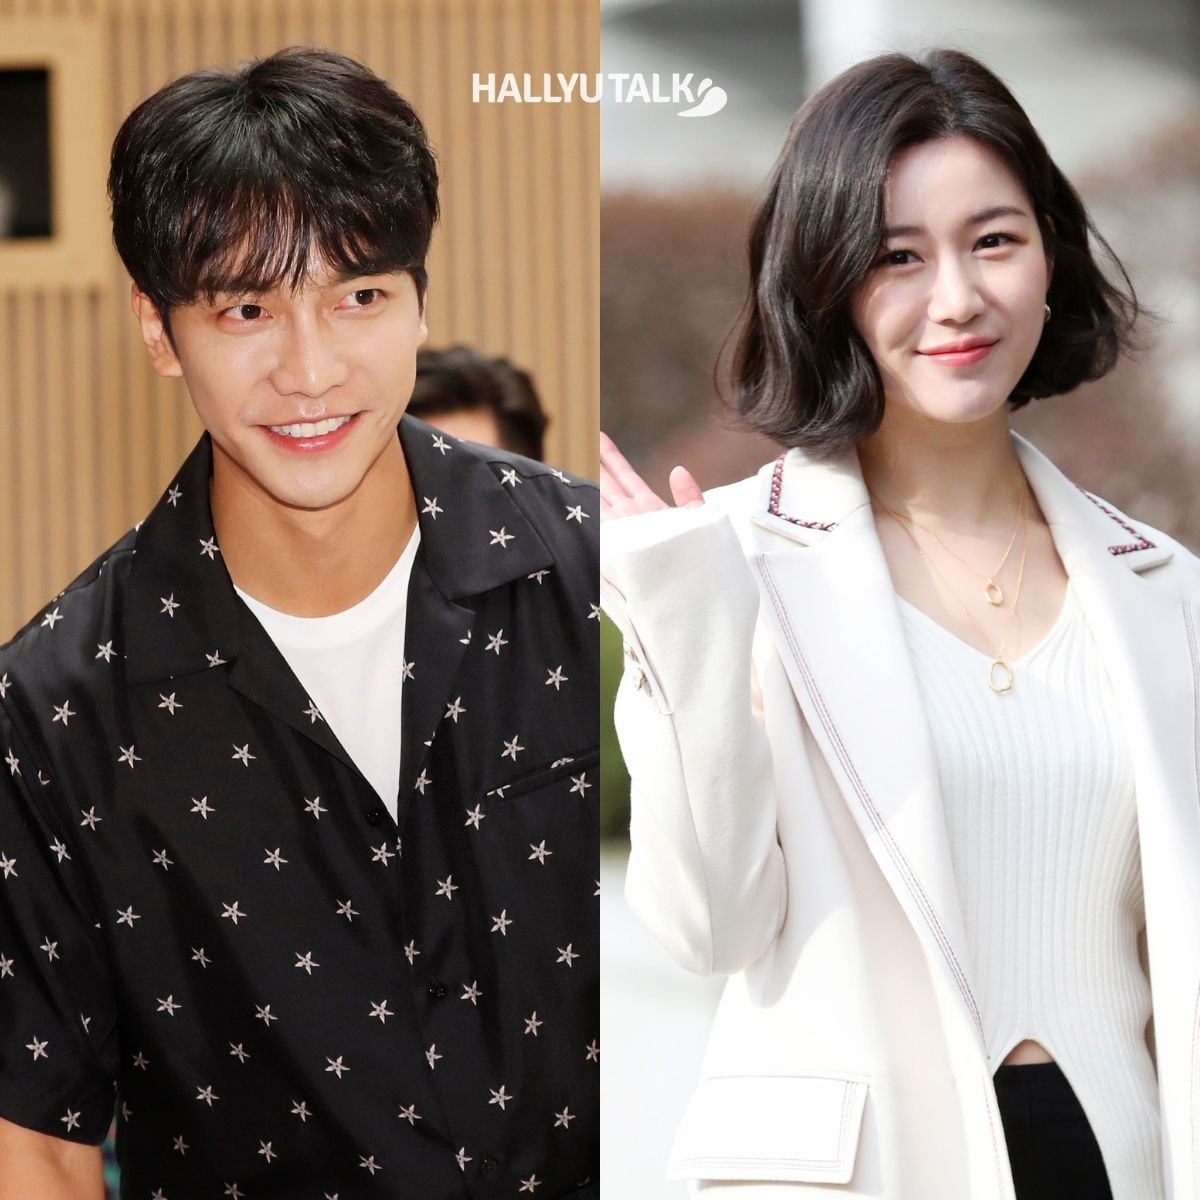 Lee Seung Gi and Lee Da In are confirmed to be dating